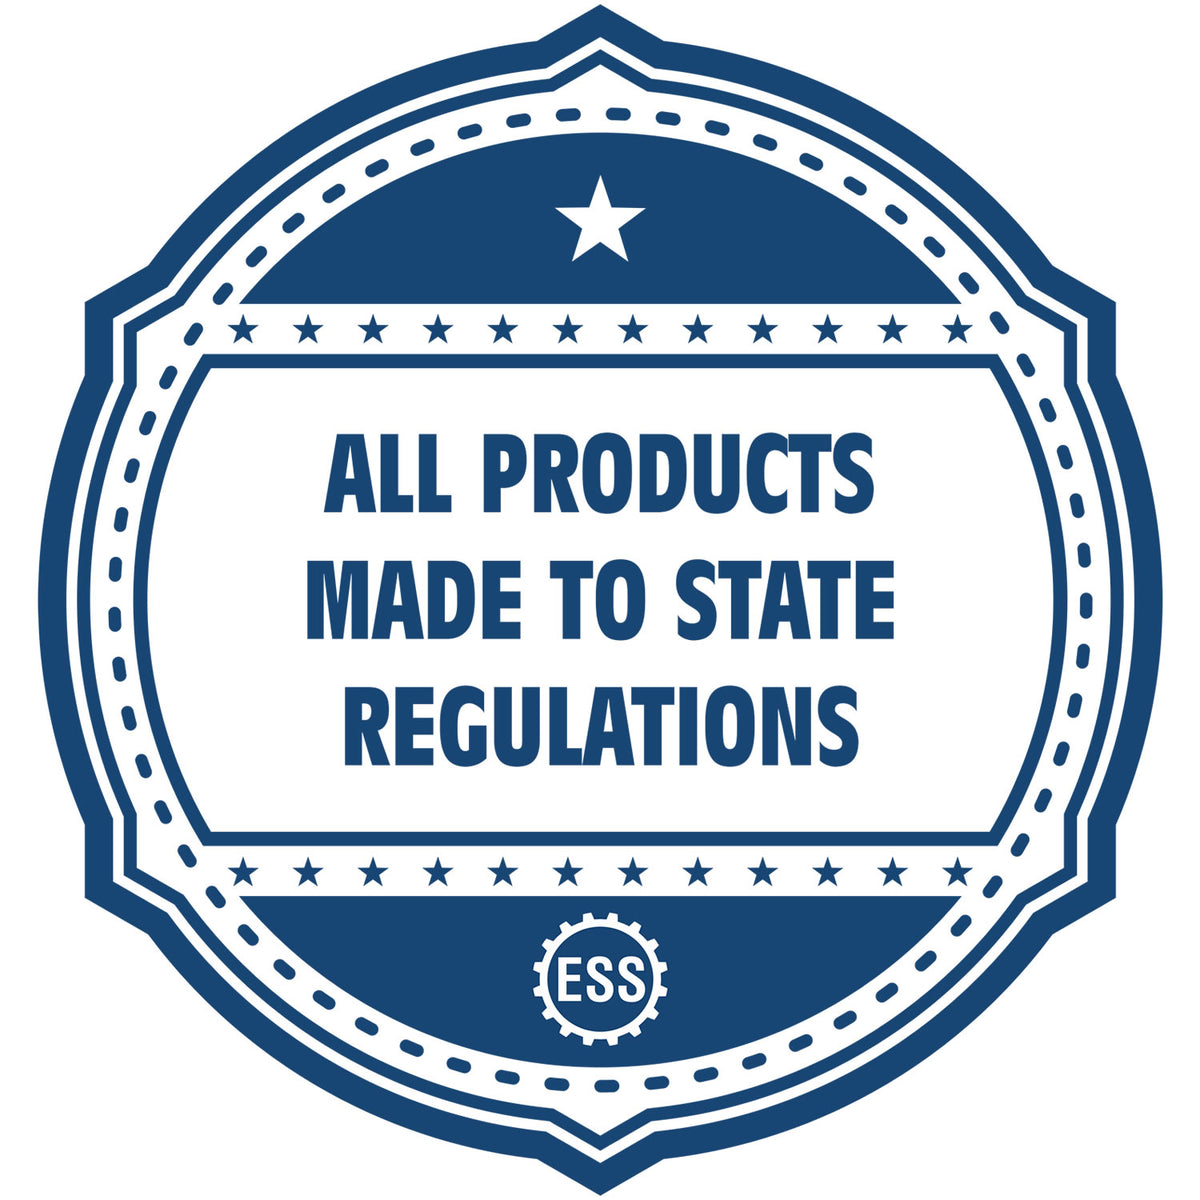 An icon or badge element for the Extended Long Reach New Hampshire Architect Seal Embosser showing that this product is made in compliance with state regulations.